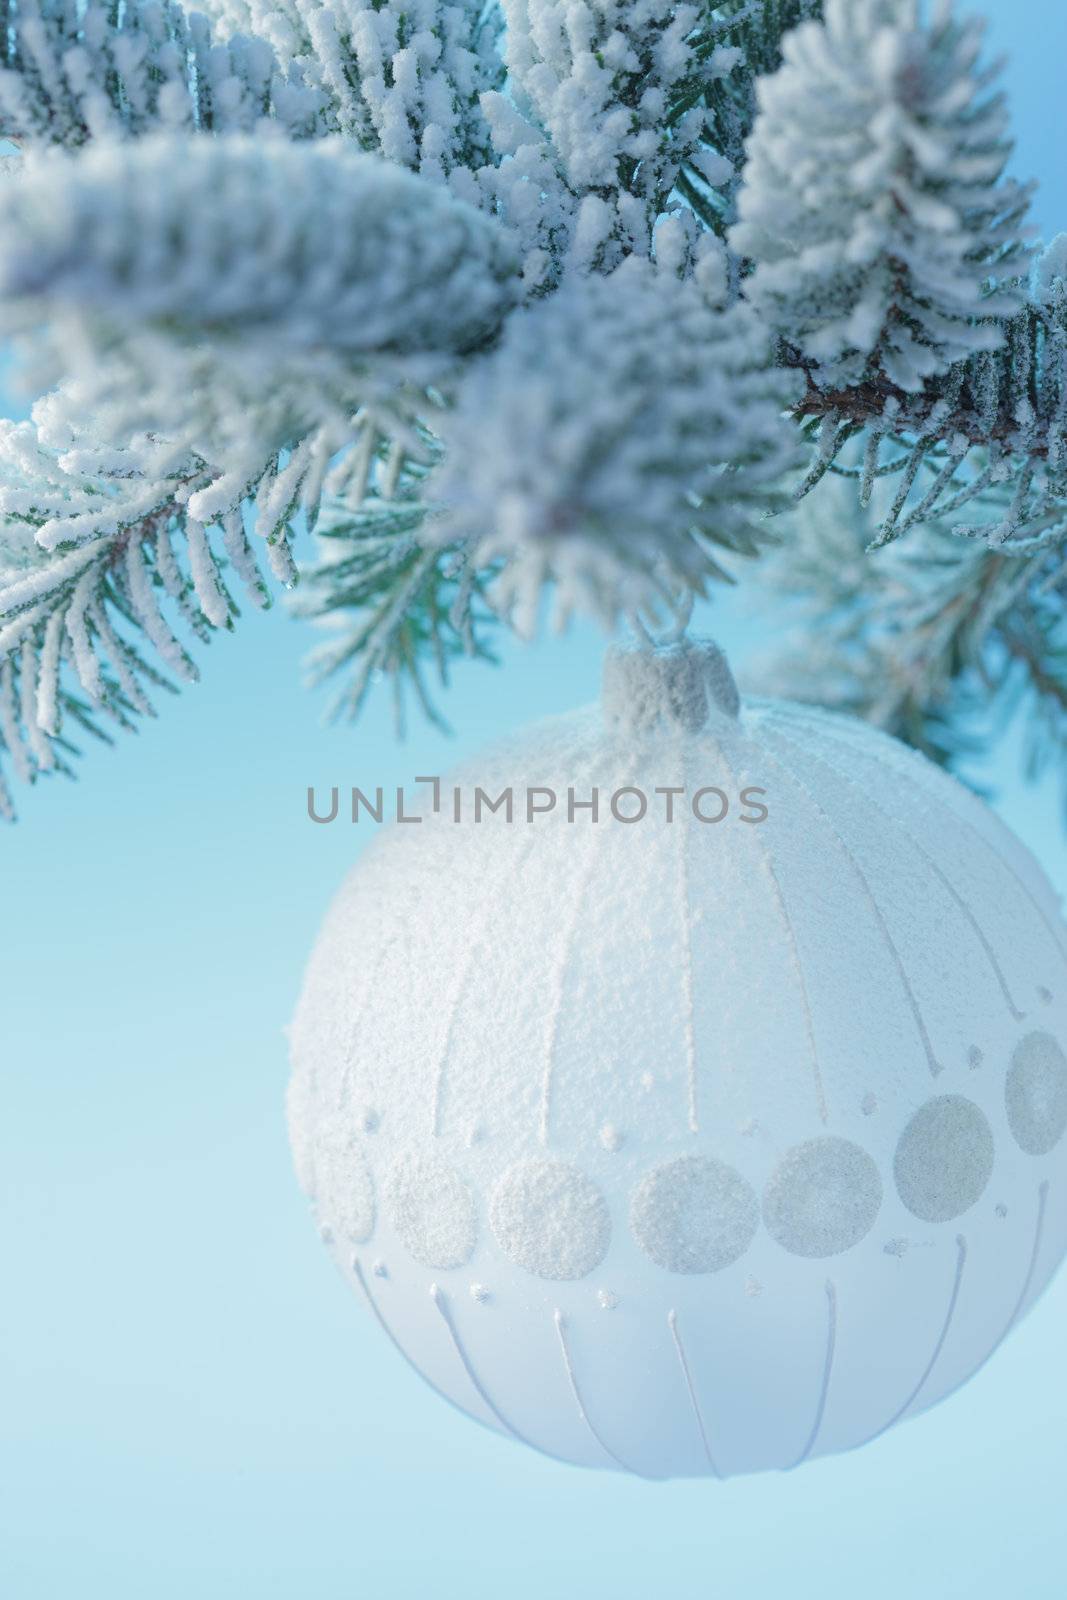 A single white bulb hangs from a frosted pine tree